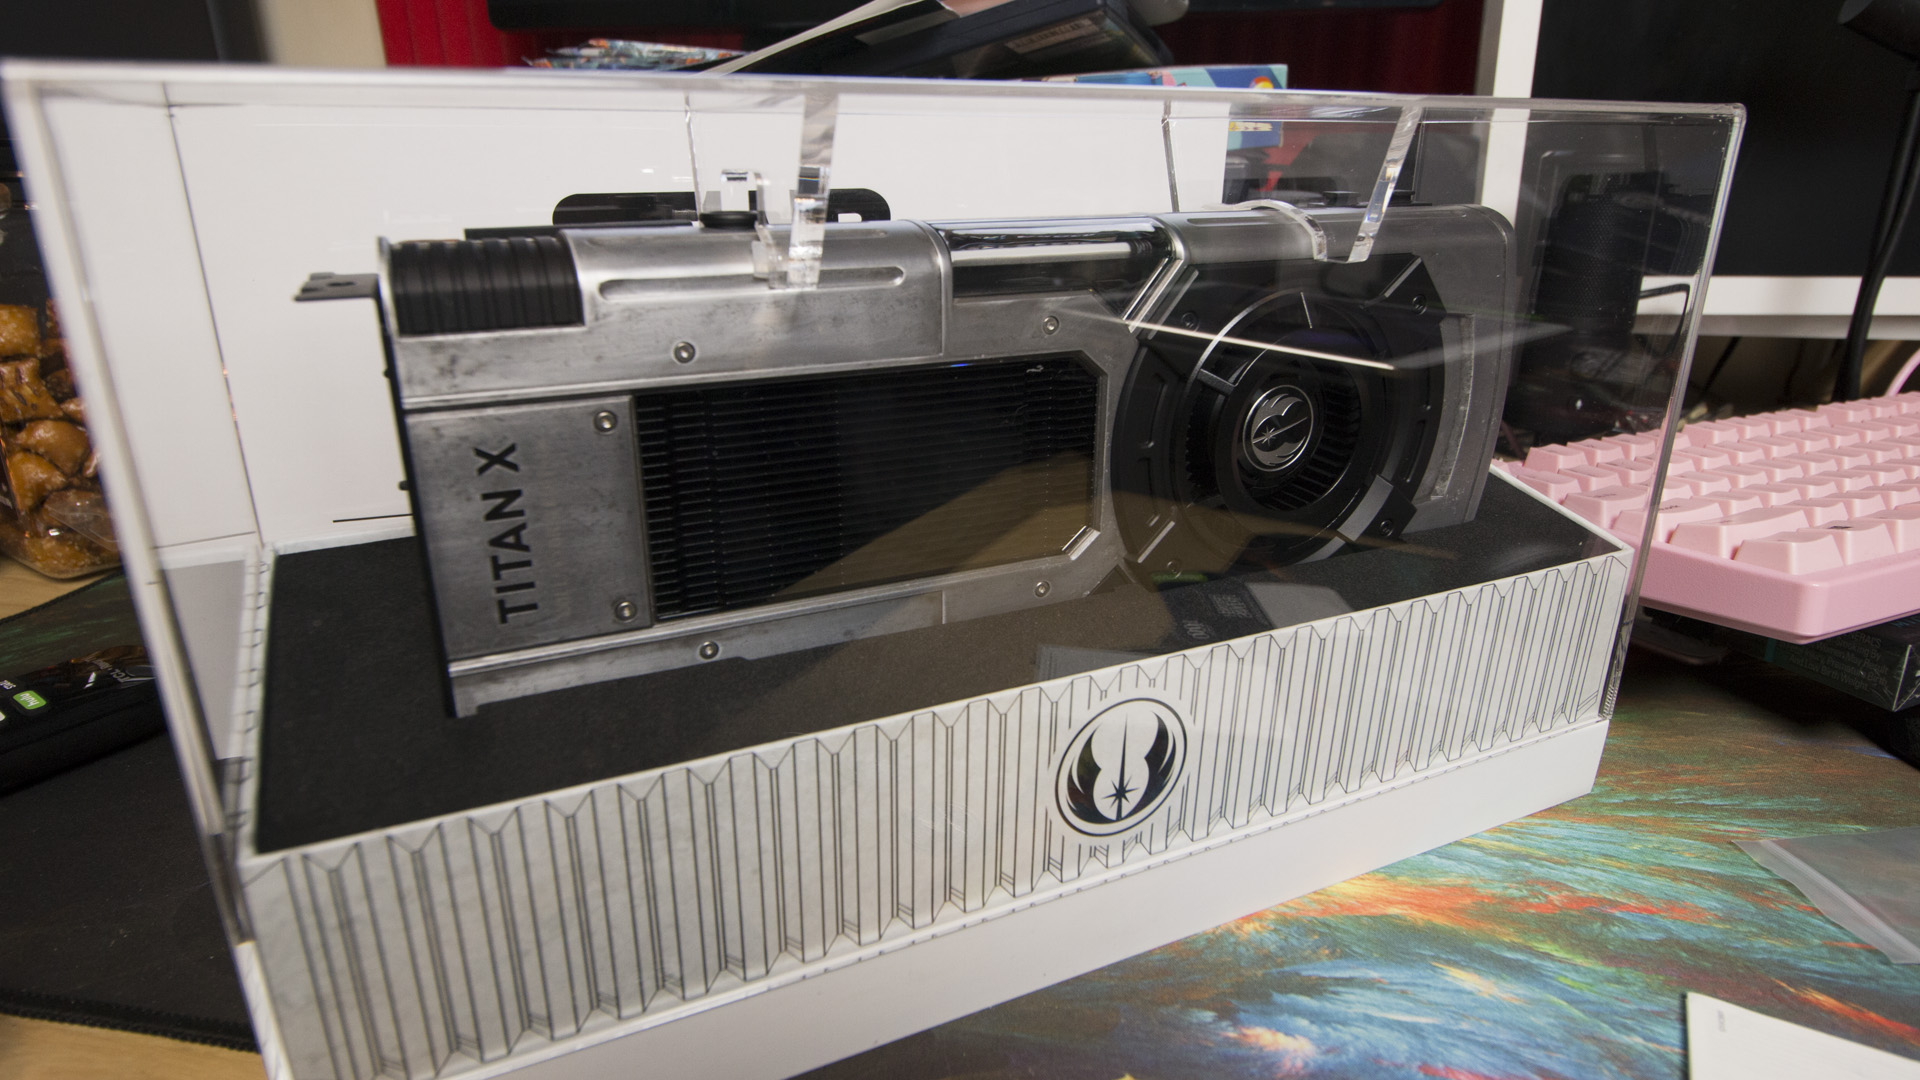 A $1,200 Graphics Card Might As Well Be Star Wars Themed